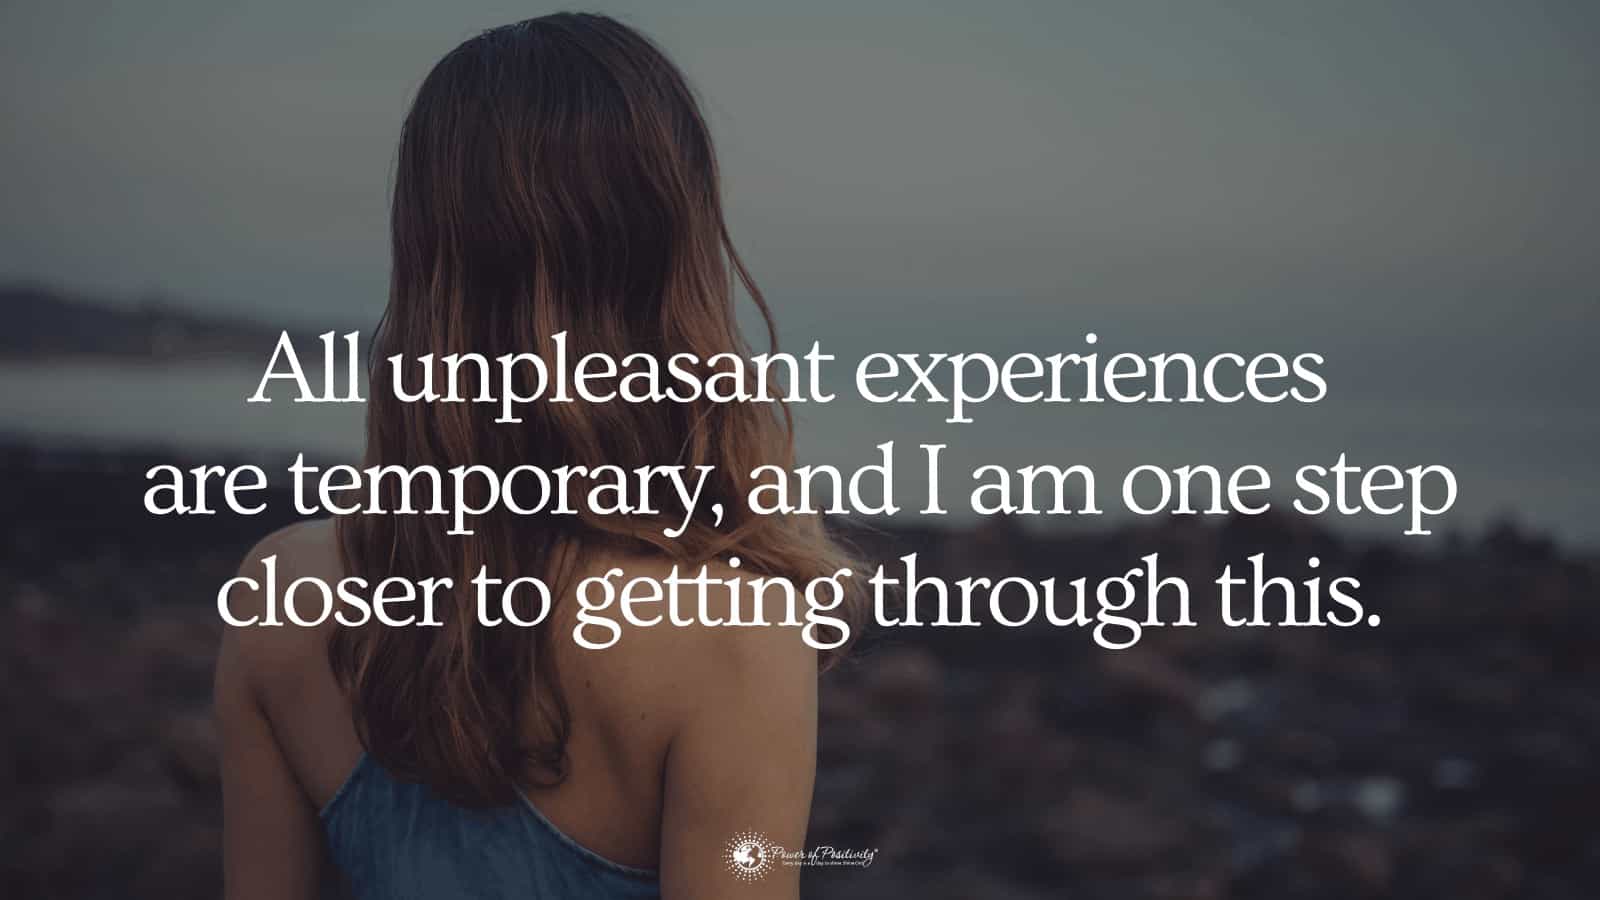 15 Affirmations of Positivity to Help You Beat Uncertainty